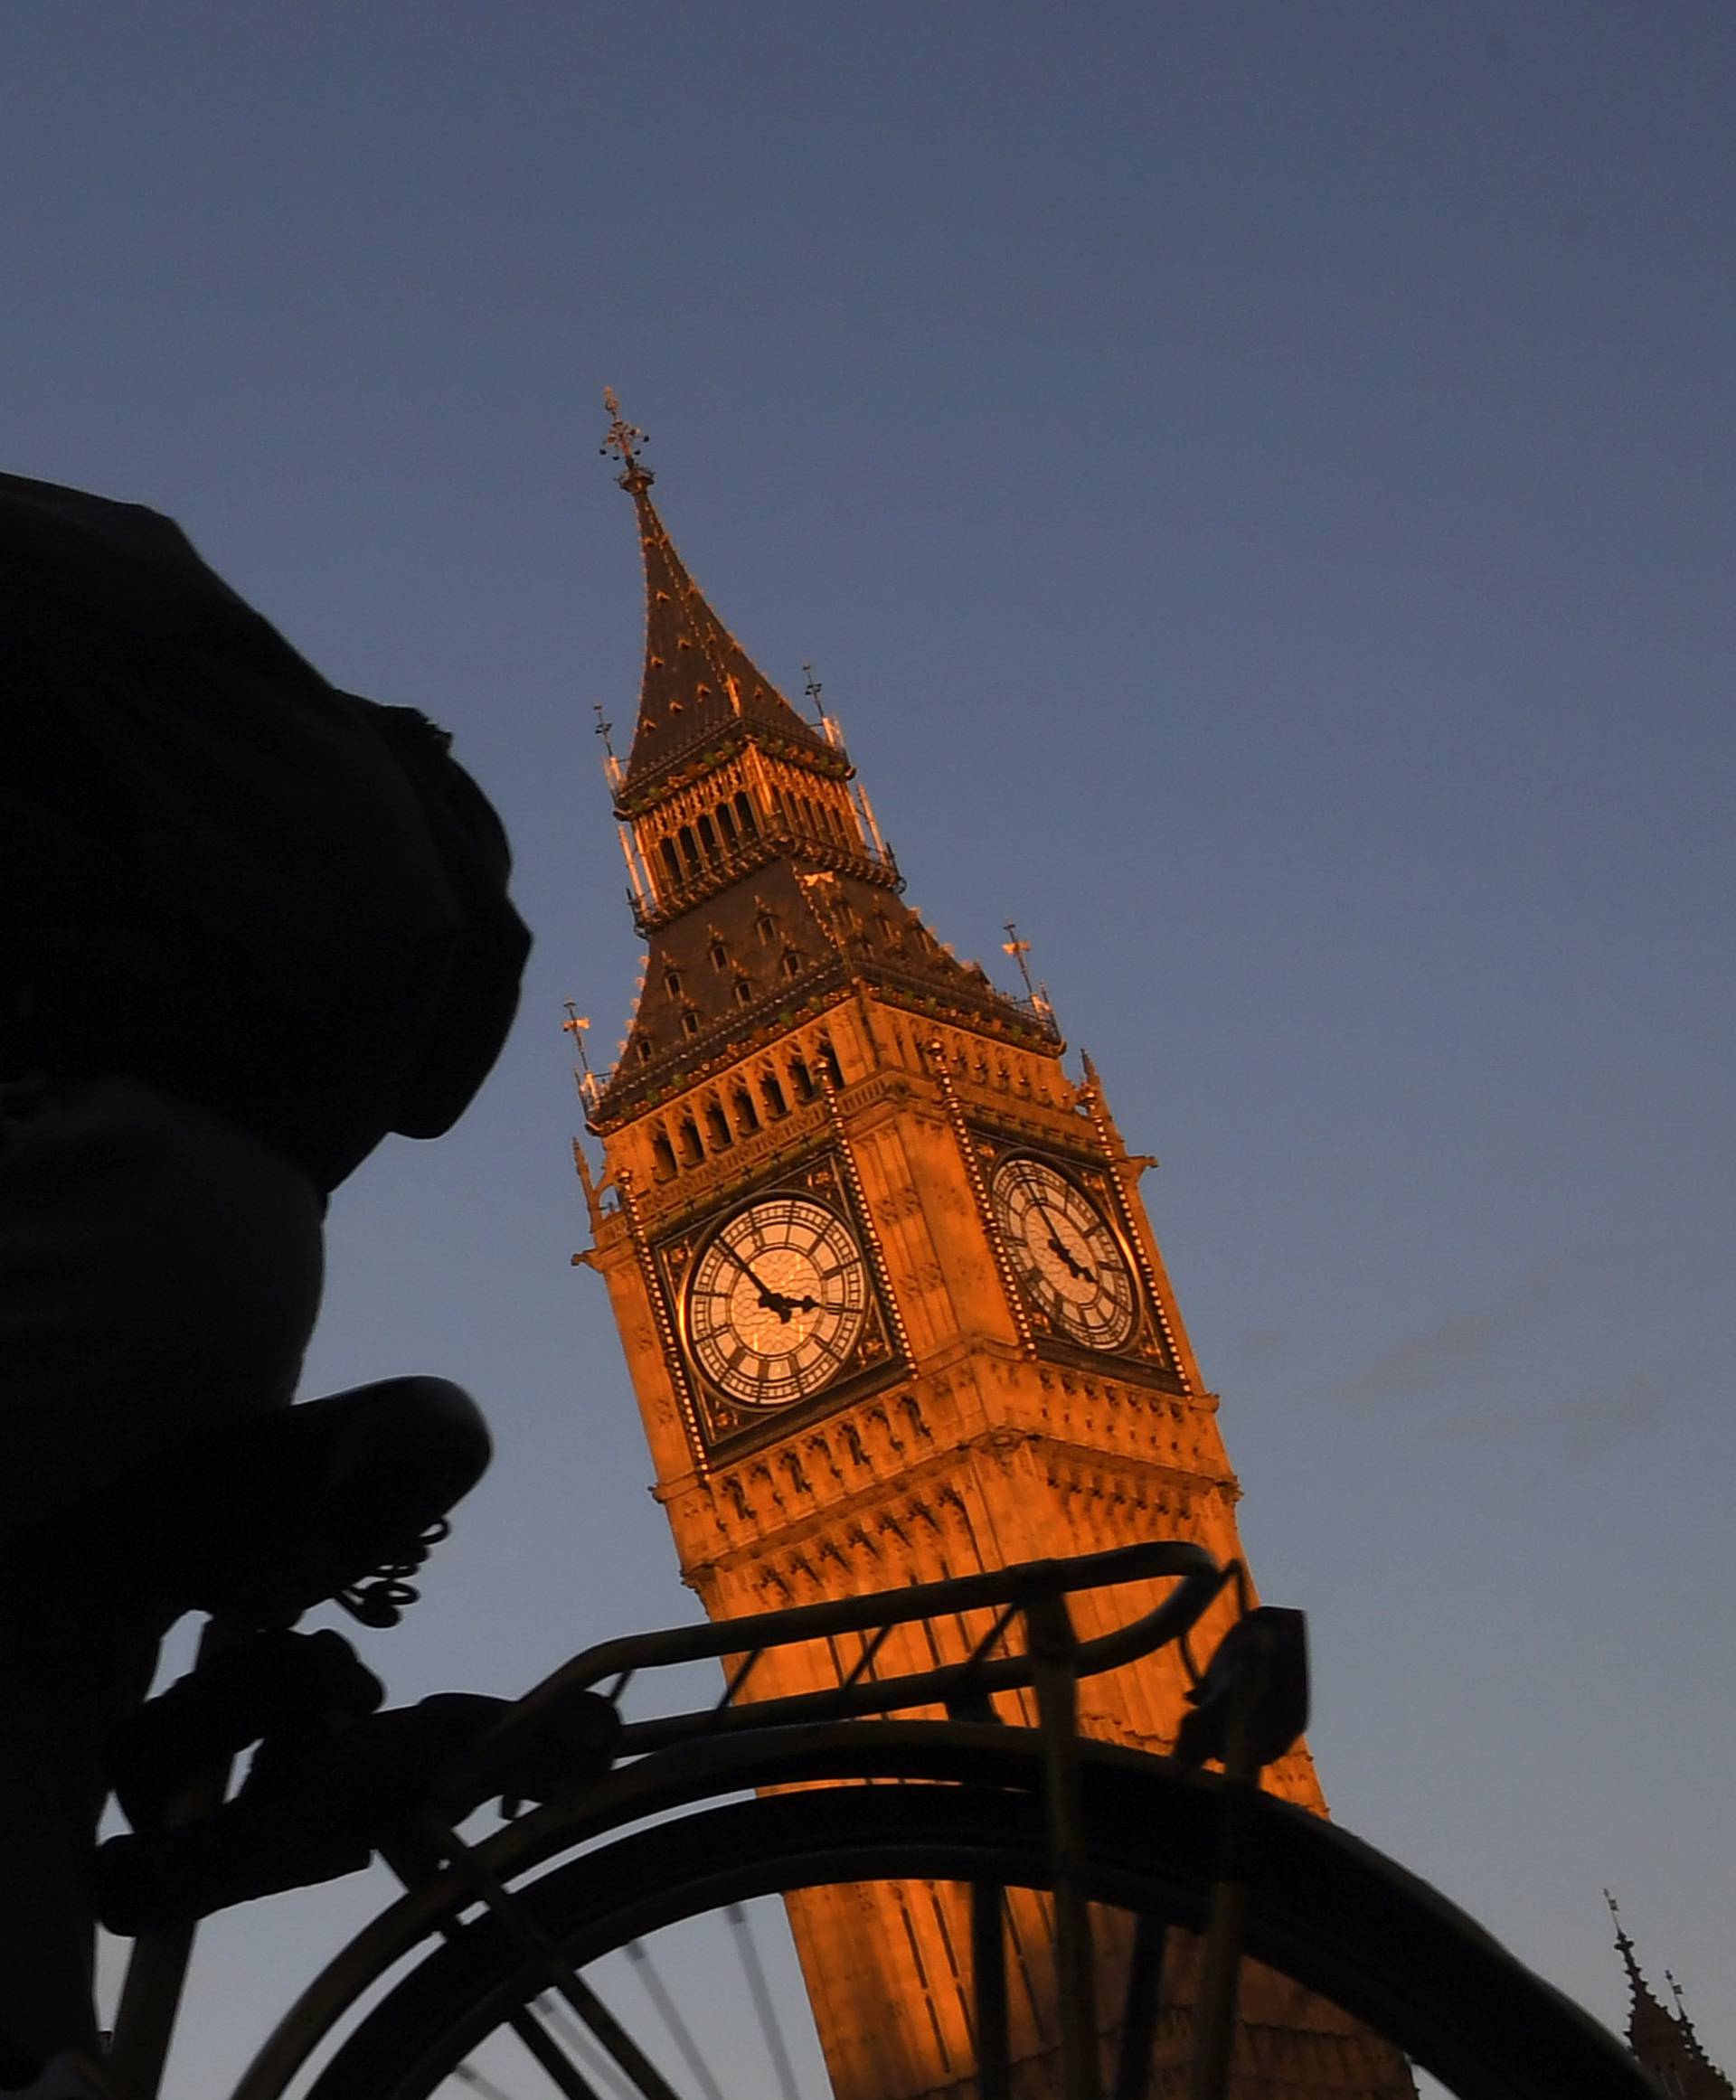 A man cycles past past Big Ben and the Houses of Parliament in late afternoon sunlight in London